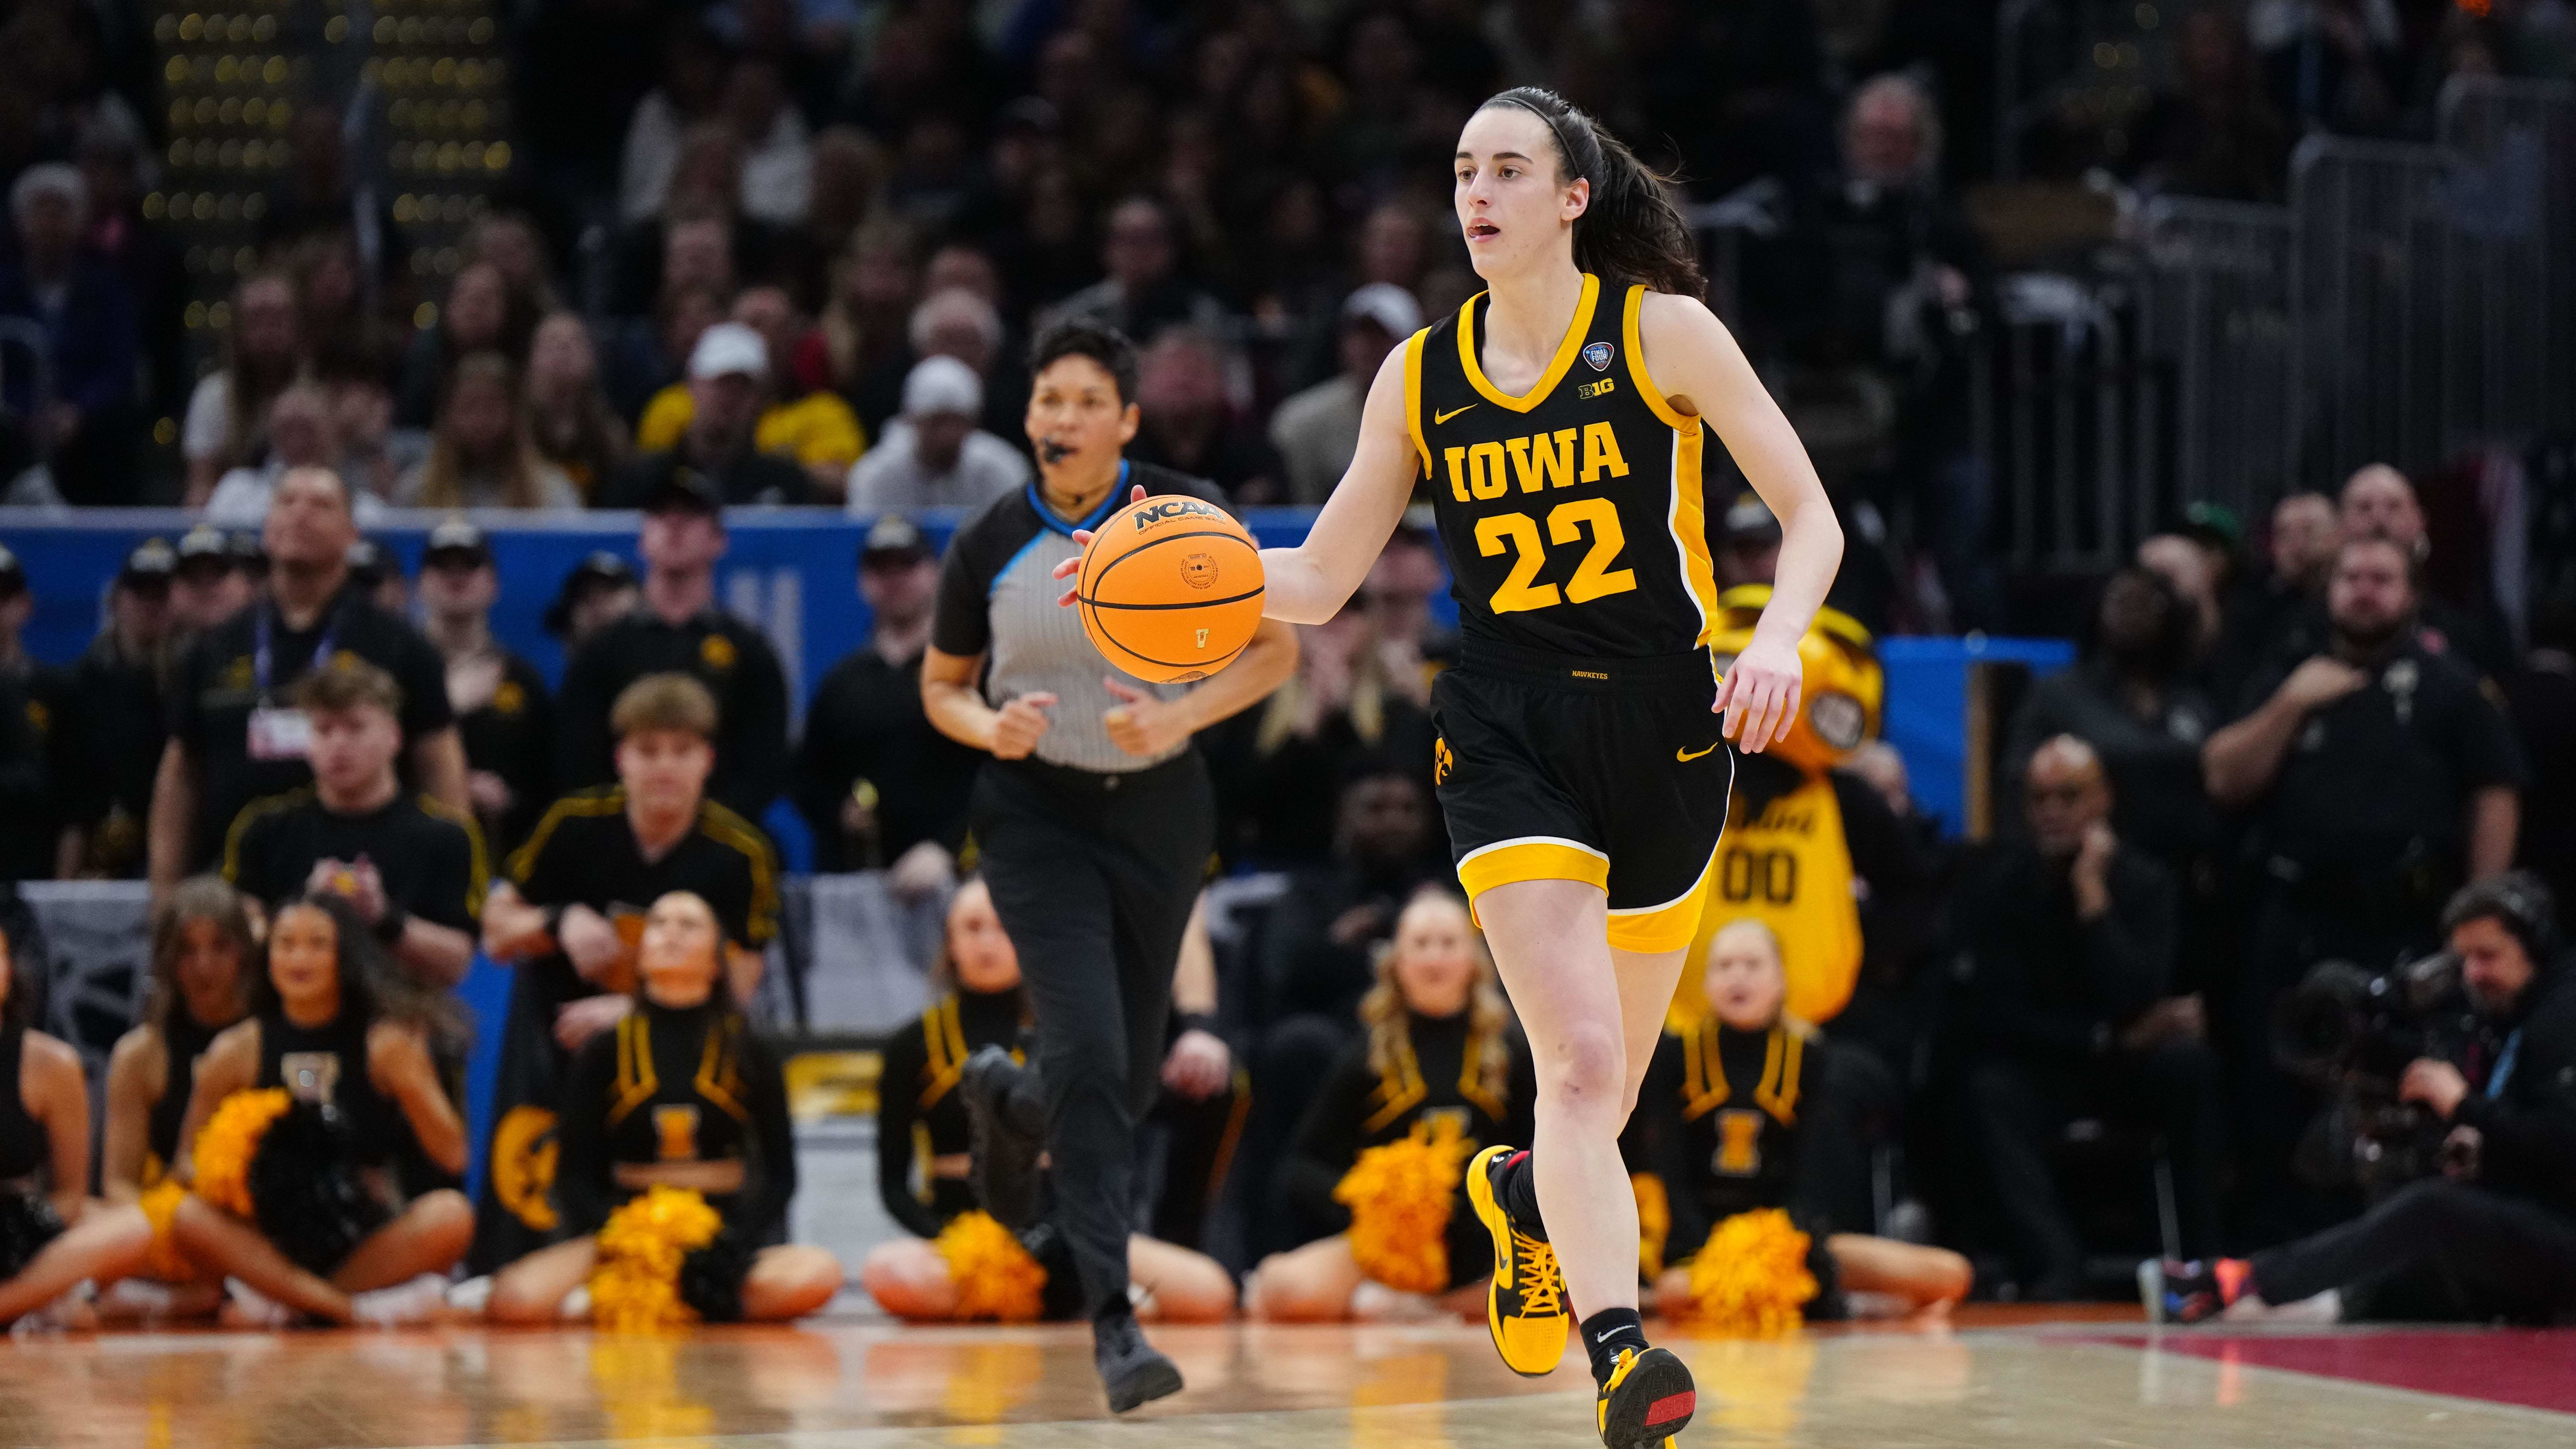 Iowa Hawkeyes guard Caitlin Clark during the National Championship against South Carolina.